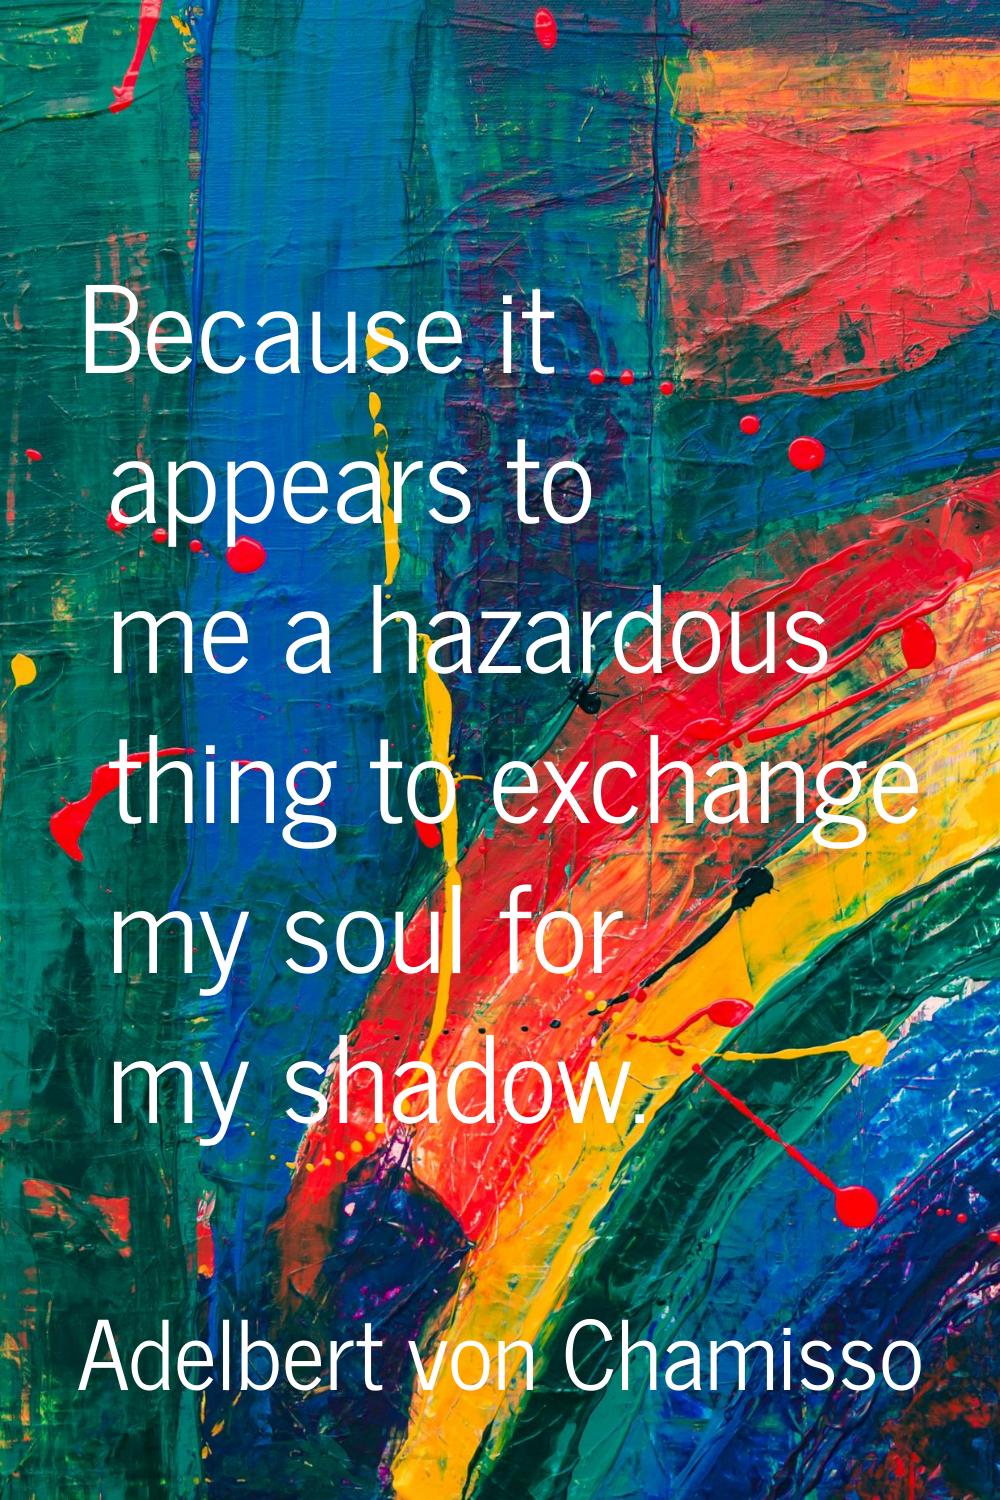 Because it appears to me a hazardous thing to exchange my soul for my shadow.